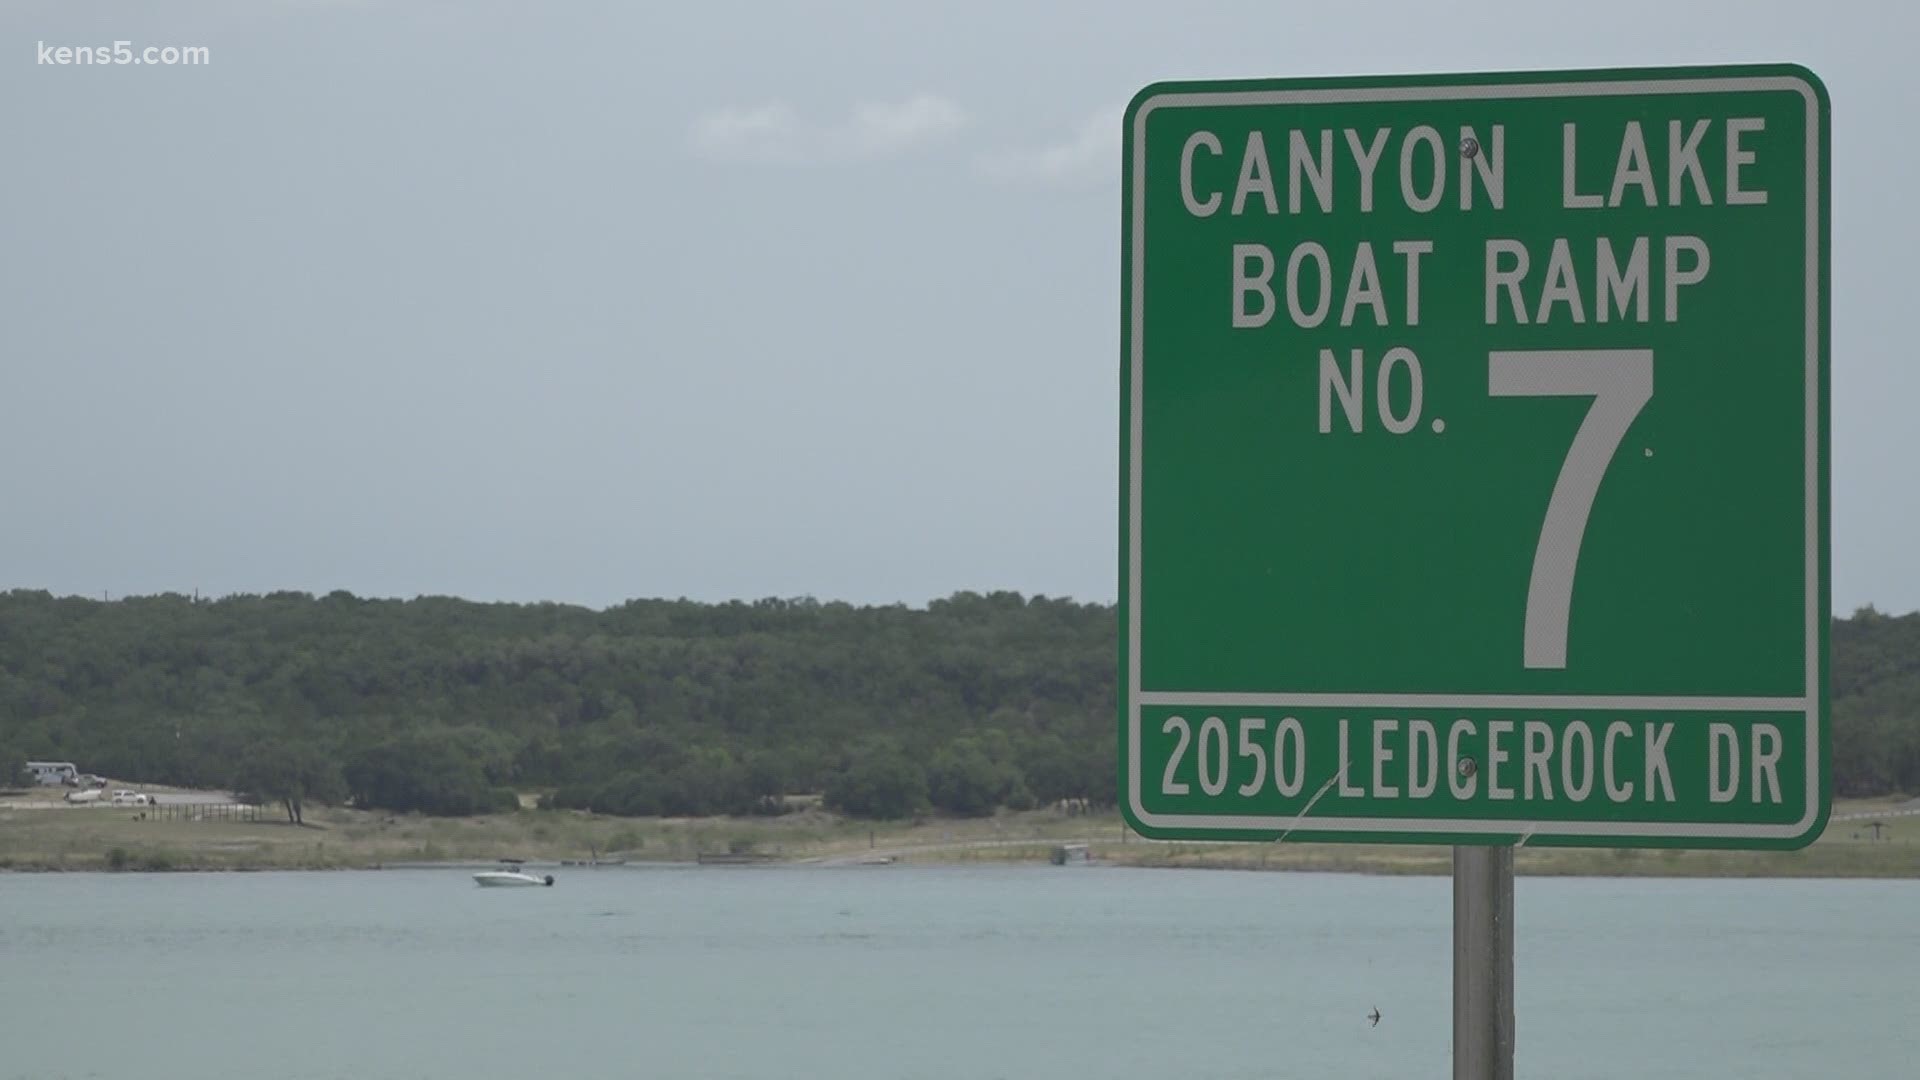 Canyon Lake and New Braunfels fire departments, game wardens and Comal County deputies are working together on this mission.